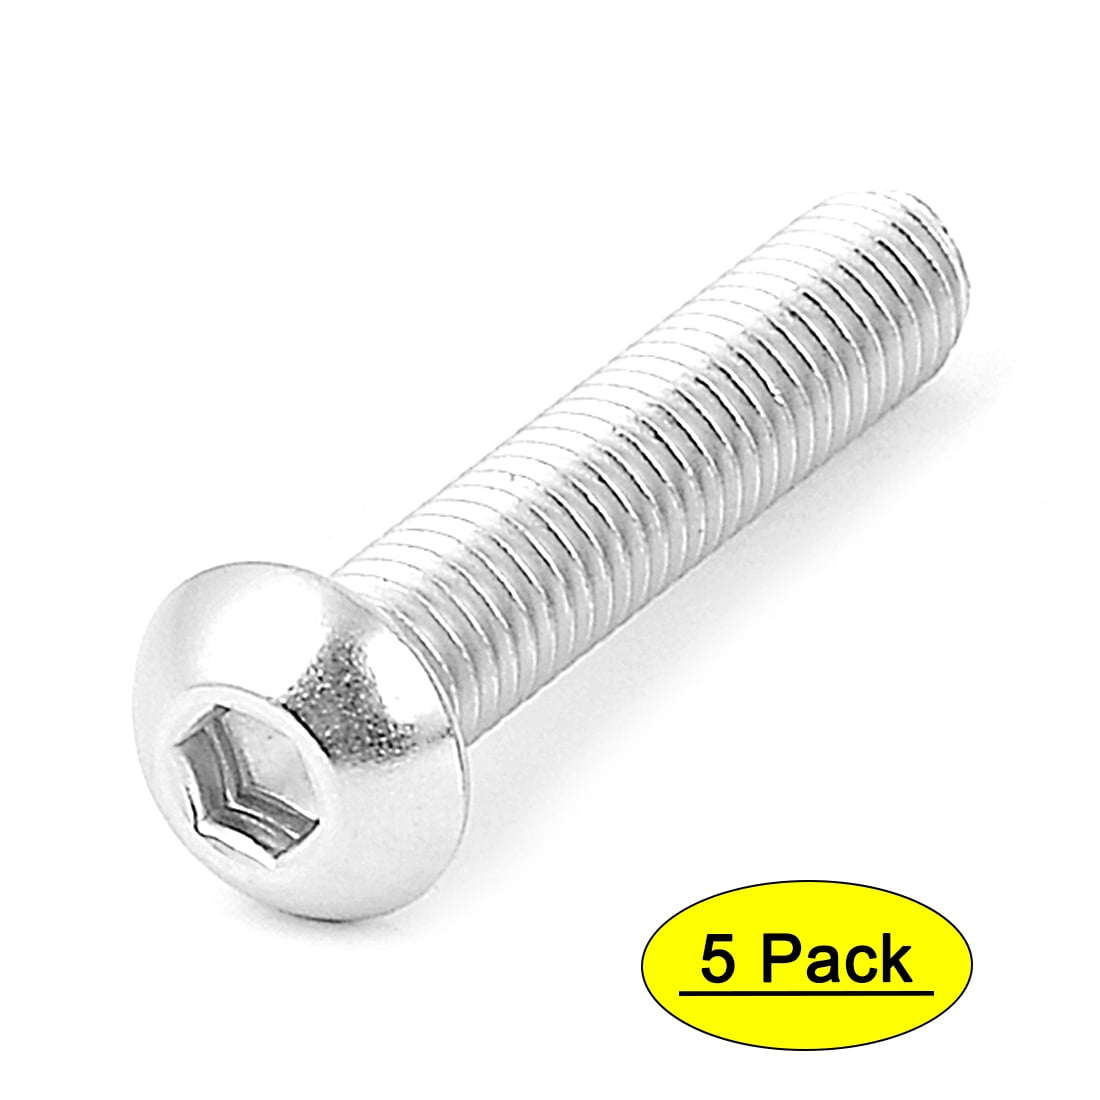 M8x1.25 Button Head Socket Cap Screw 10mm-40mm Stainless Steel ISO 7380 A2 18-8 